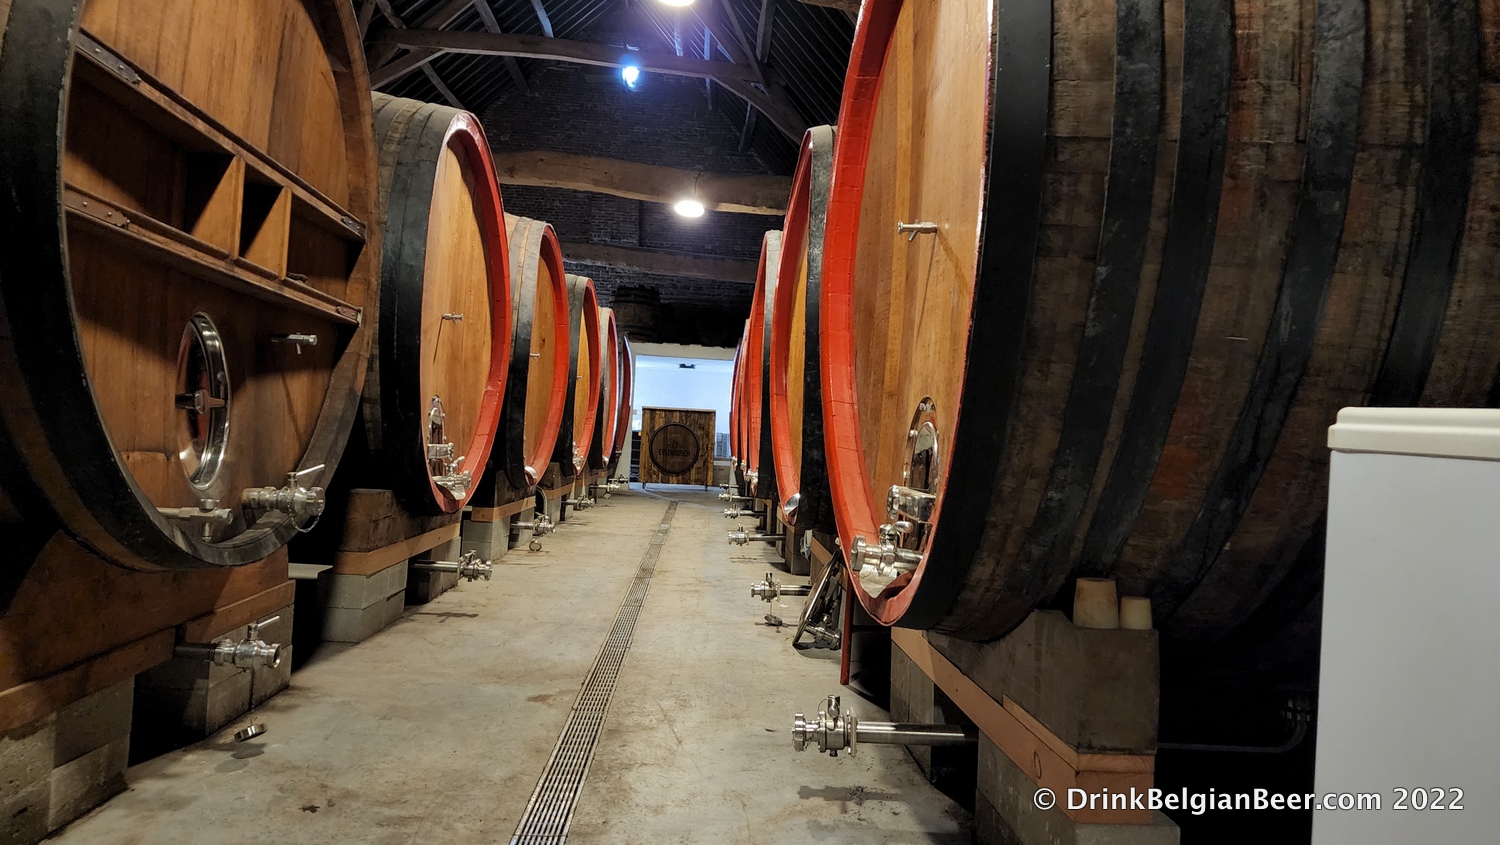 Brouwerij Eylenbosch joins The High Council for Artisanal Lambic Beers (HORAL)